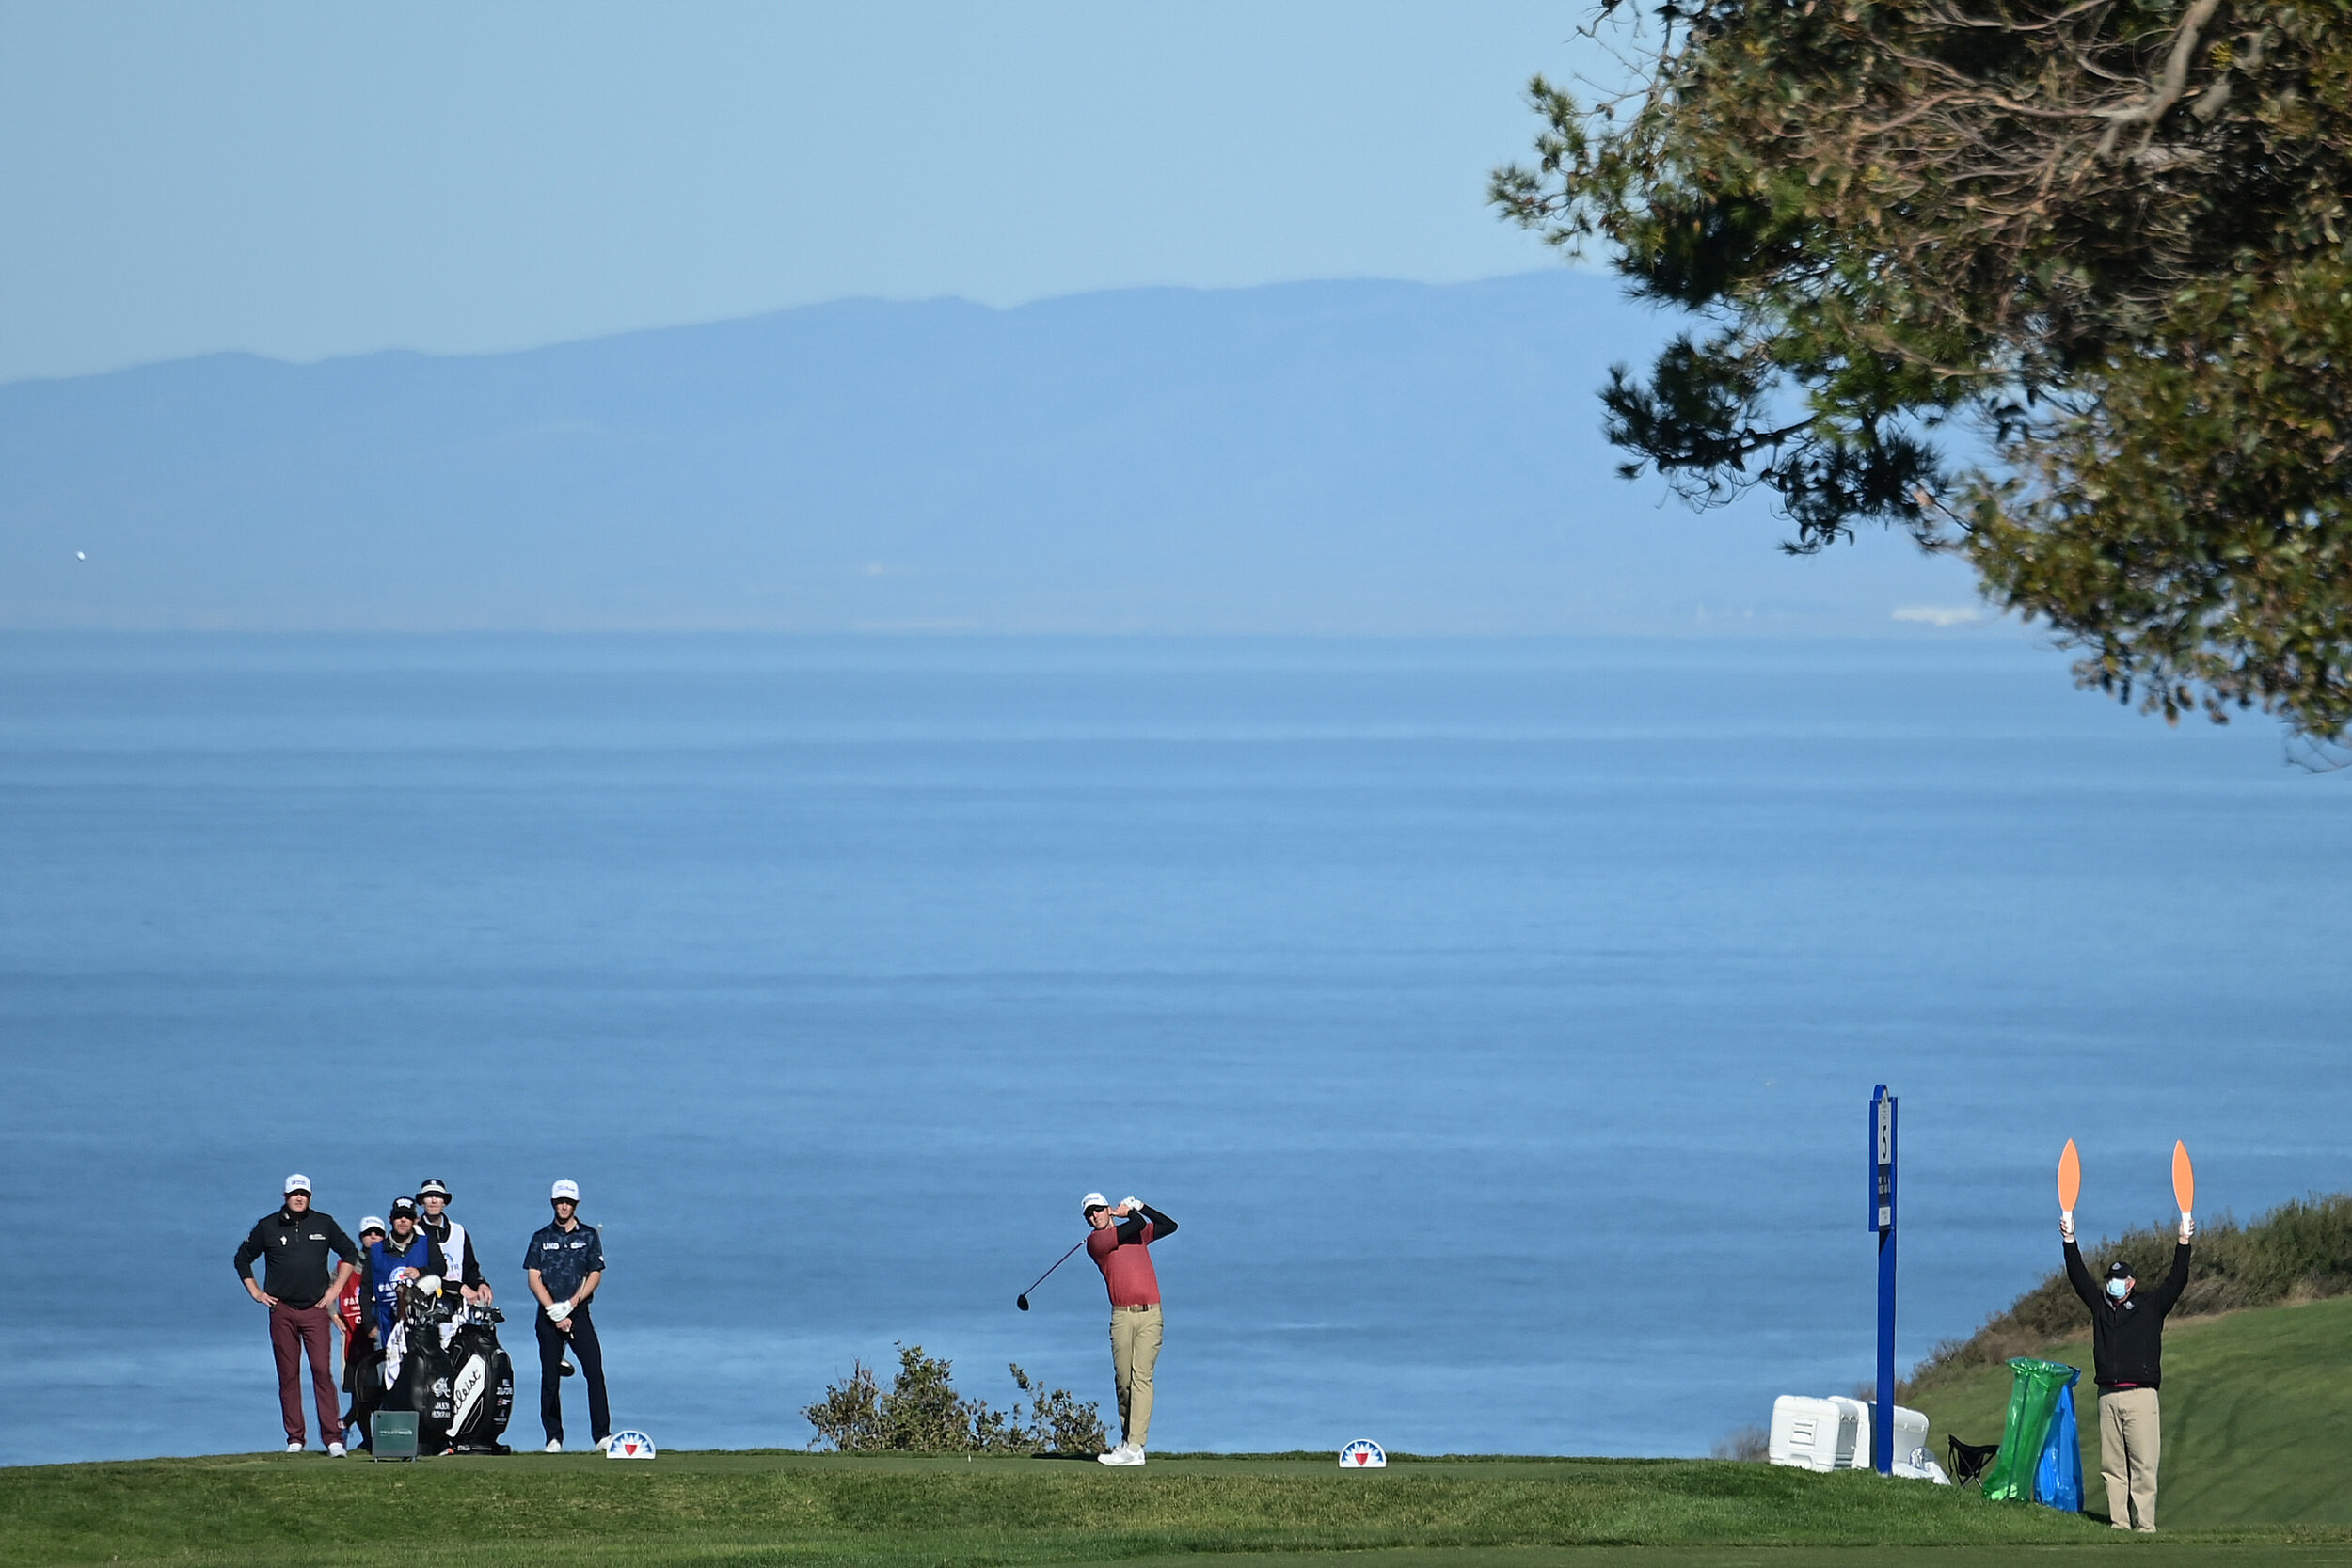  SAN DIEGO, CALIFORNIA - JANUARY 30: Richy Werenski hits his tee shot on the 5th hole during round three of the Farmers Insurance Open at Torrey Pines South on January 30, 2021 in San Diego, California. (Photo by Donald Miralle/Getty Images) 